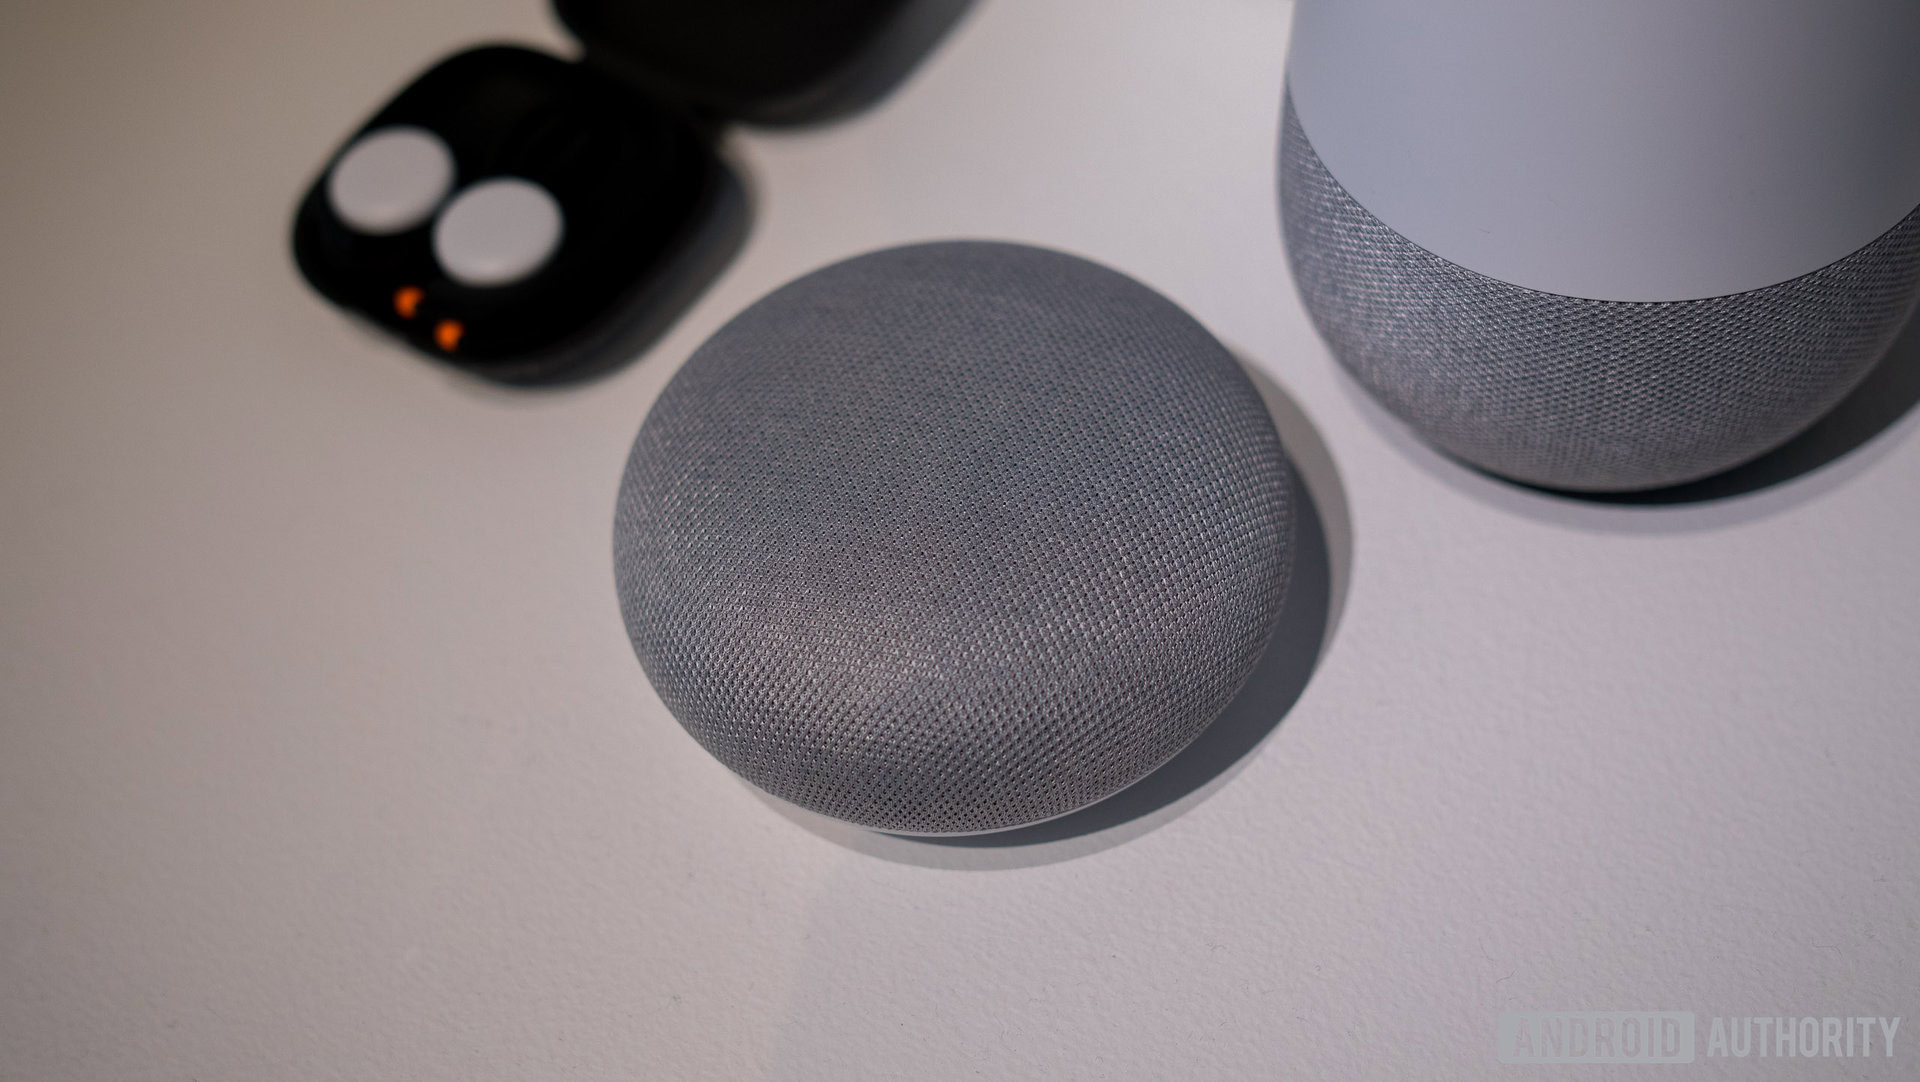 https://www.androidauthority.com/wp-content/uploads/2017/10/Google-Home-Mini-and-Max-Hands-On-5.jpg